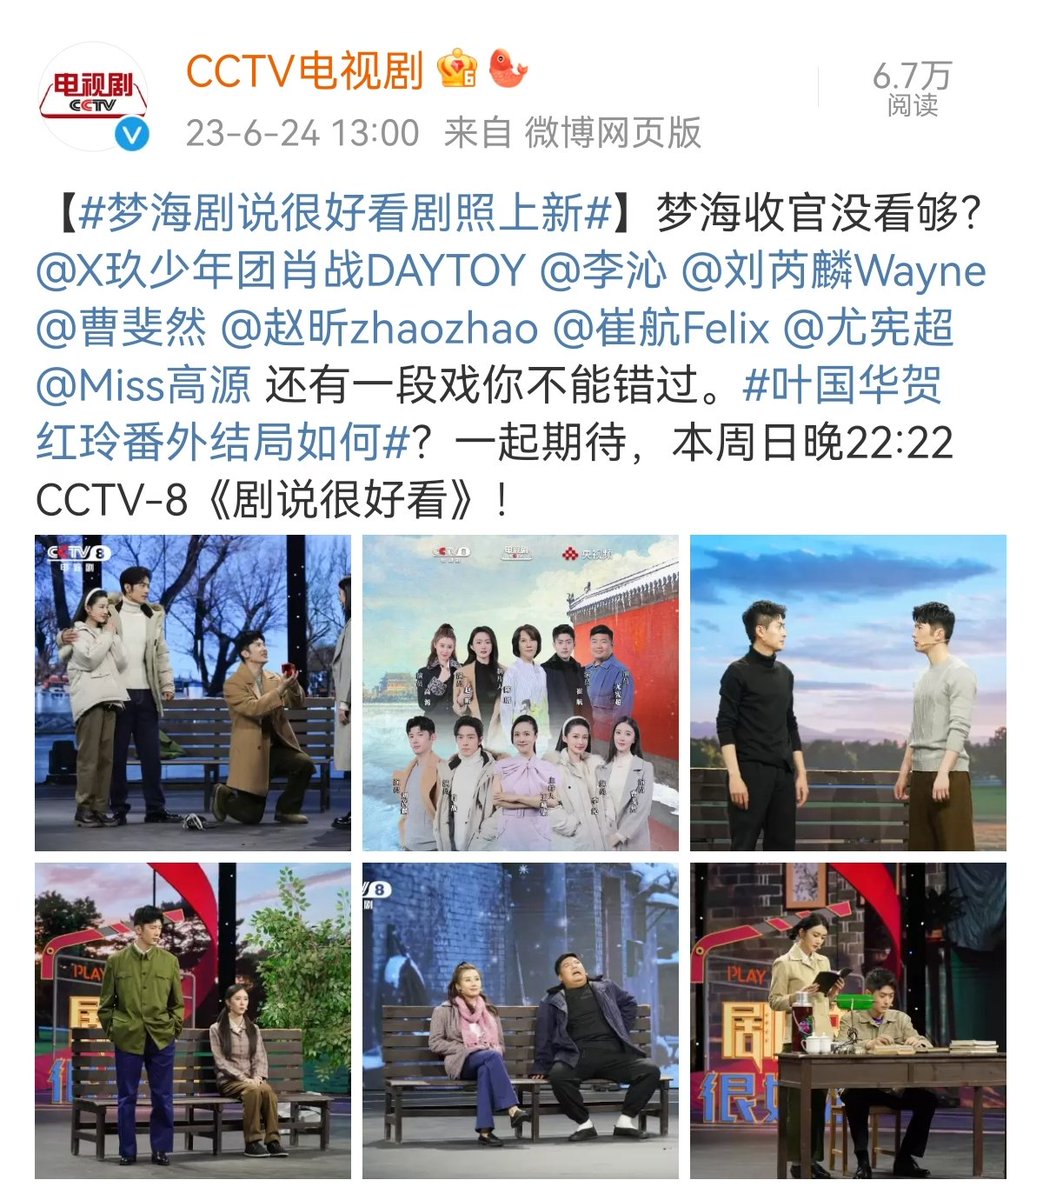 【230624 Photo】

#WhereDreamsBegin
#TheYouthMemories
#XiaoZhan #肖战 #SeanXiao

CCTV Drama Weibo updated:

This Sunday night at 22:22 CCTV-8, let's look forward to “Play the Play”!